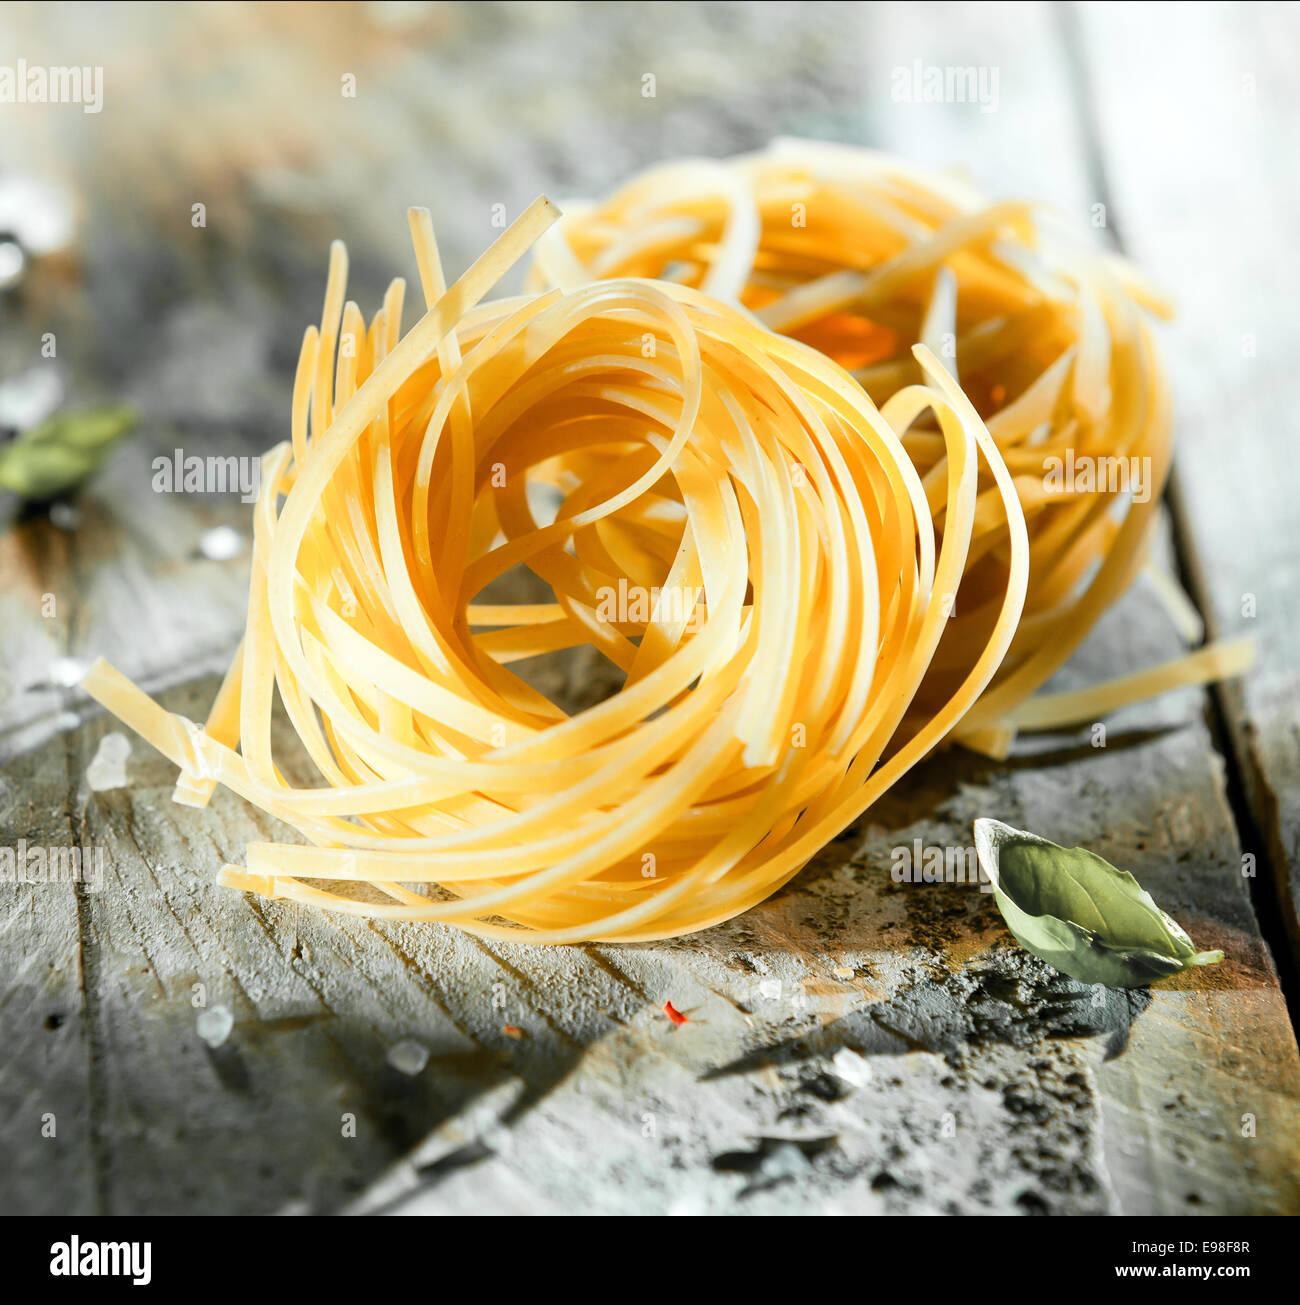 Uncooked coils of Italian linguine or tagliatelli pasta made from dried durum wheat dough on a grungy wooden table, square format Stock Photo